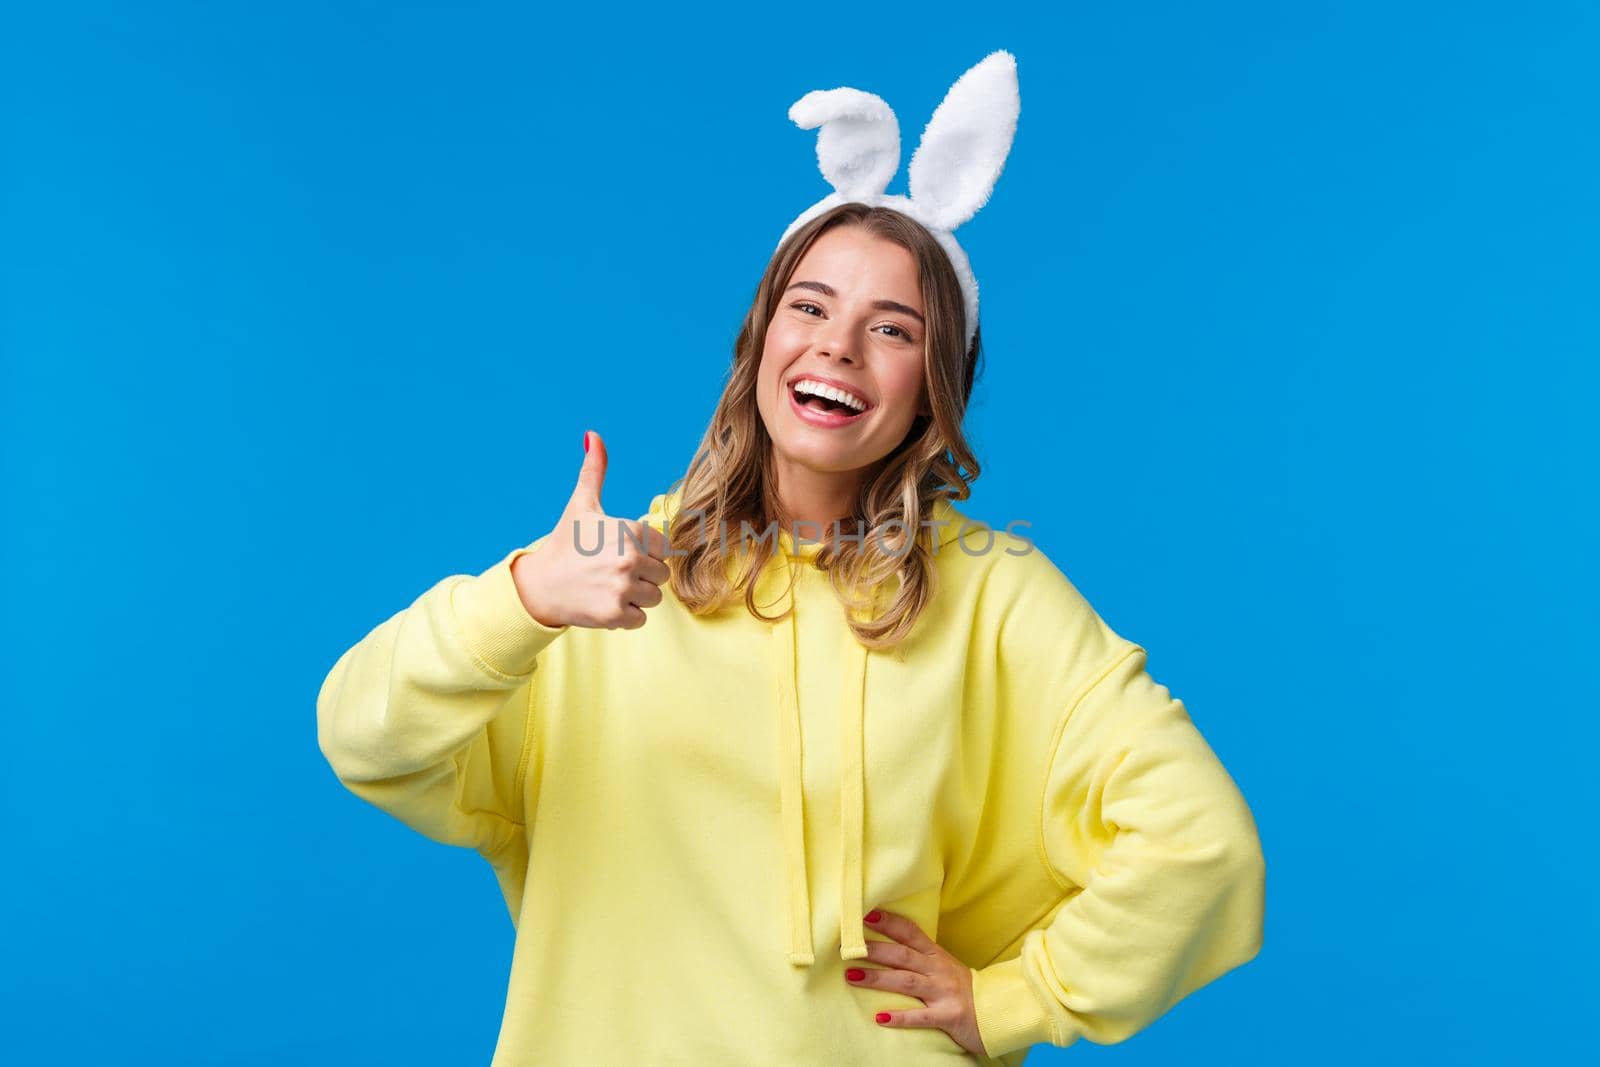 Holidays, traditions and celebration concept. Optimistic cute blond girl with rabbit ears laughing and showing approval gesture, thumb-up praise nice work, happy Easter, blue background.